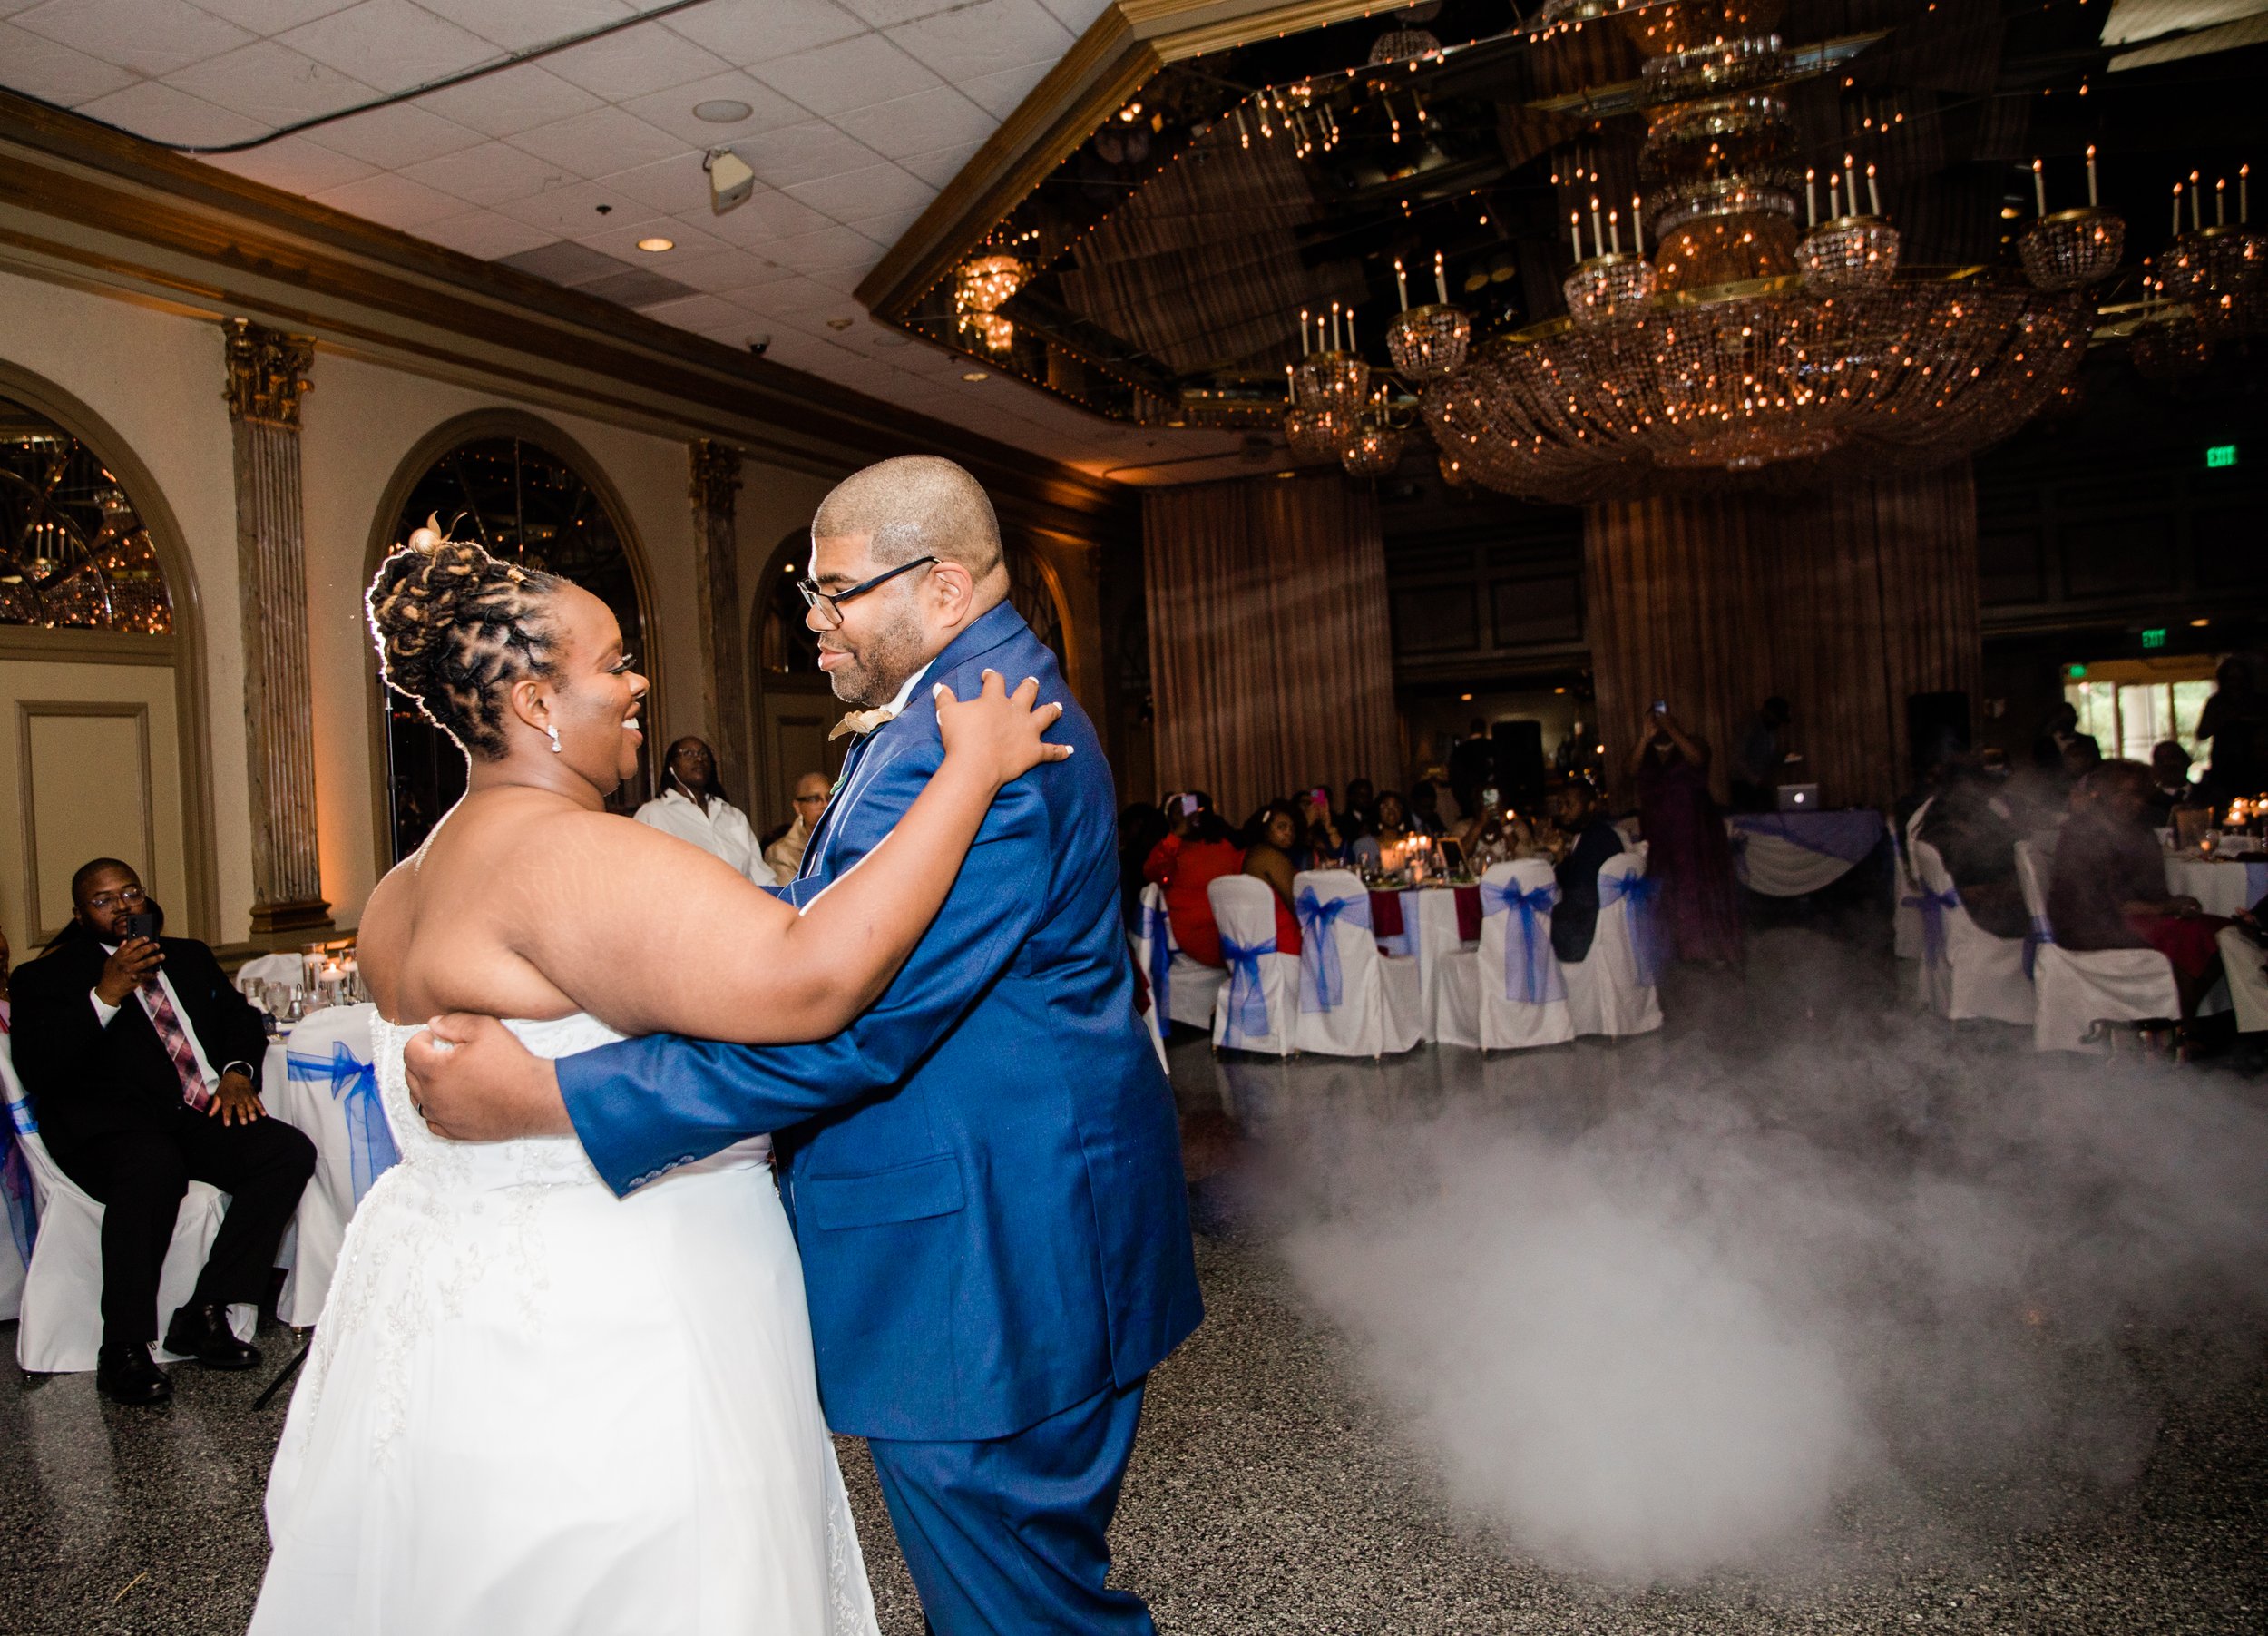 Harry Potter and Star Wars Themed Wedding at Martins West in Baltimore Maryland Shot by Megapixels Media Photography-36.jpg